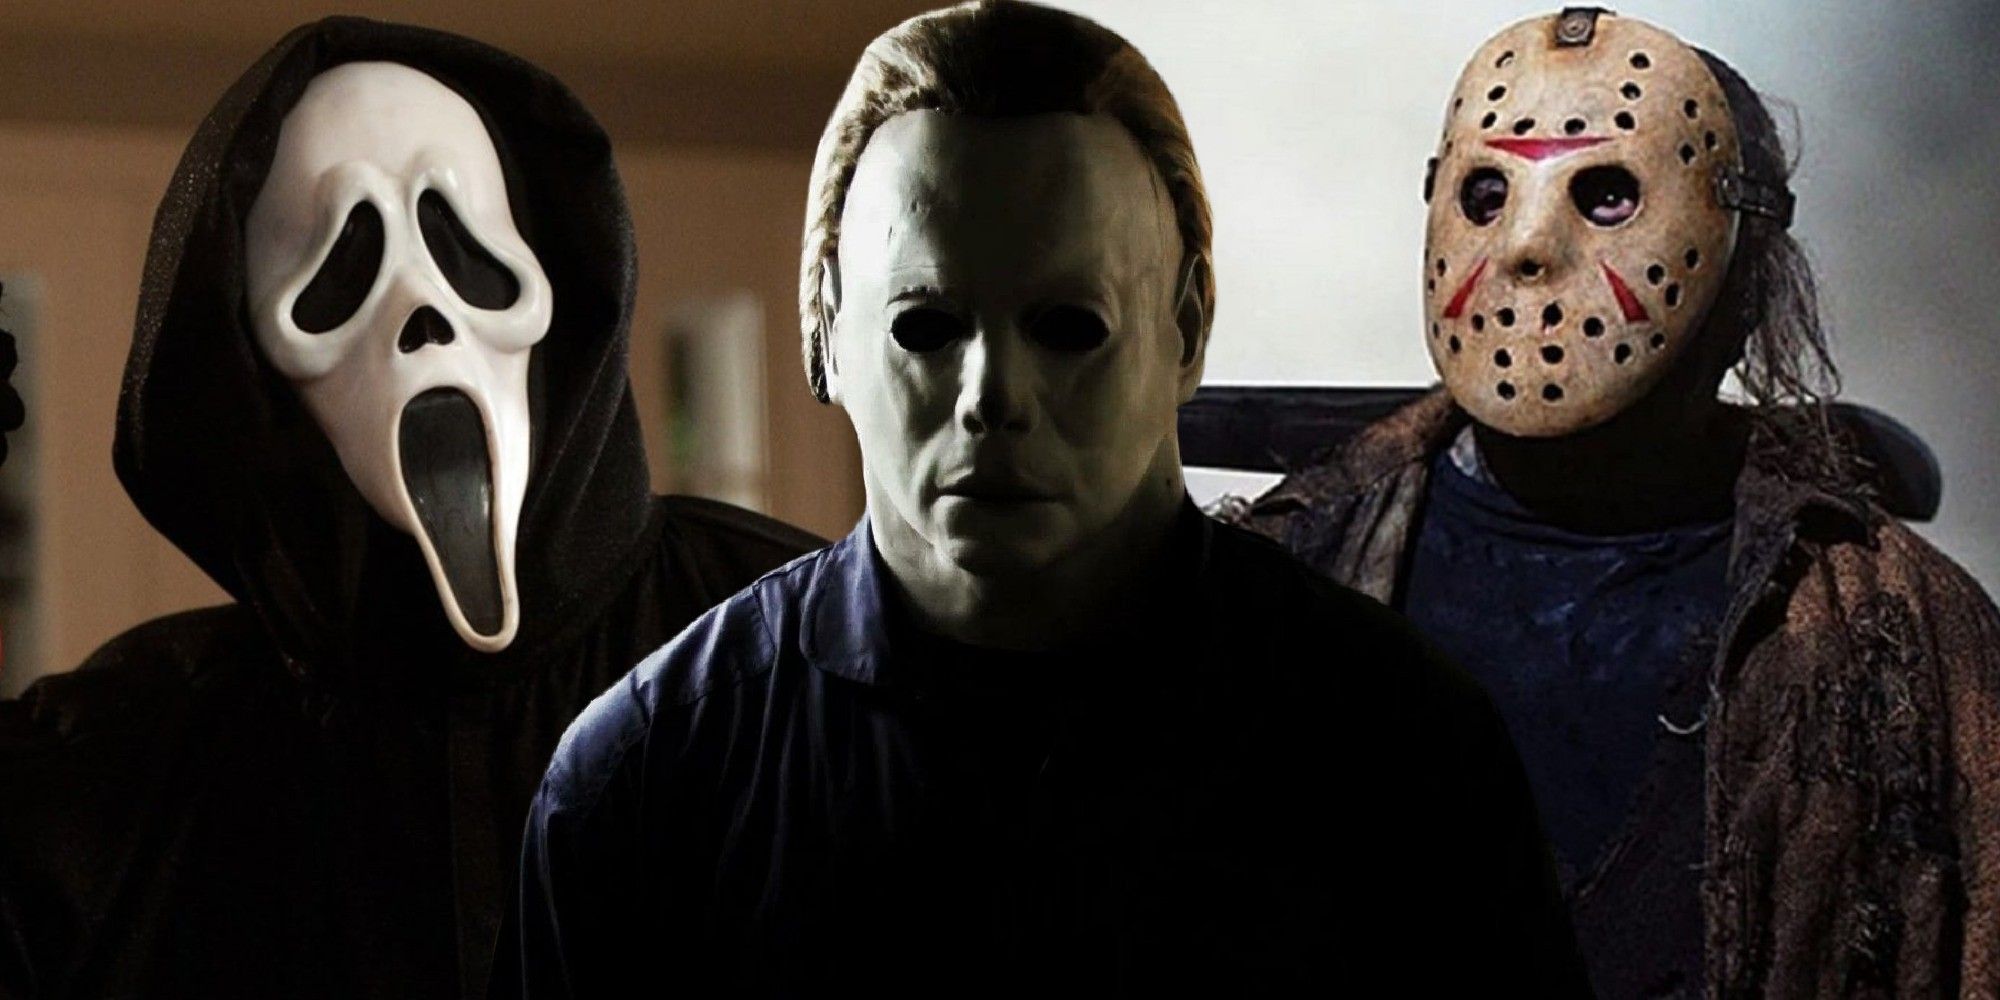 A collage of slasher movie killers Ghostface, Michael Myers and Jason Voorhees